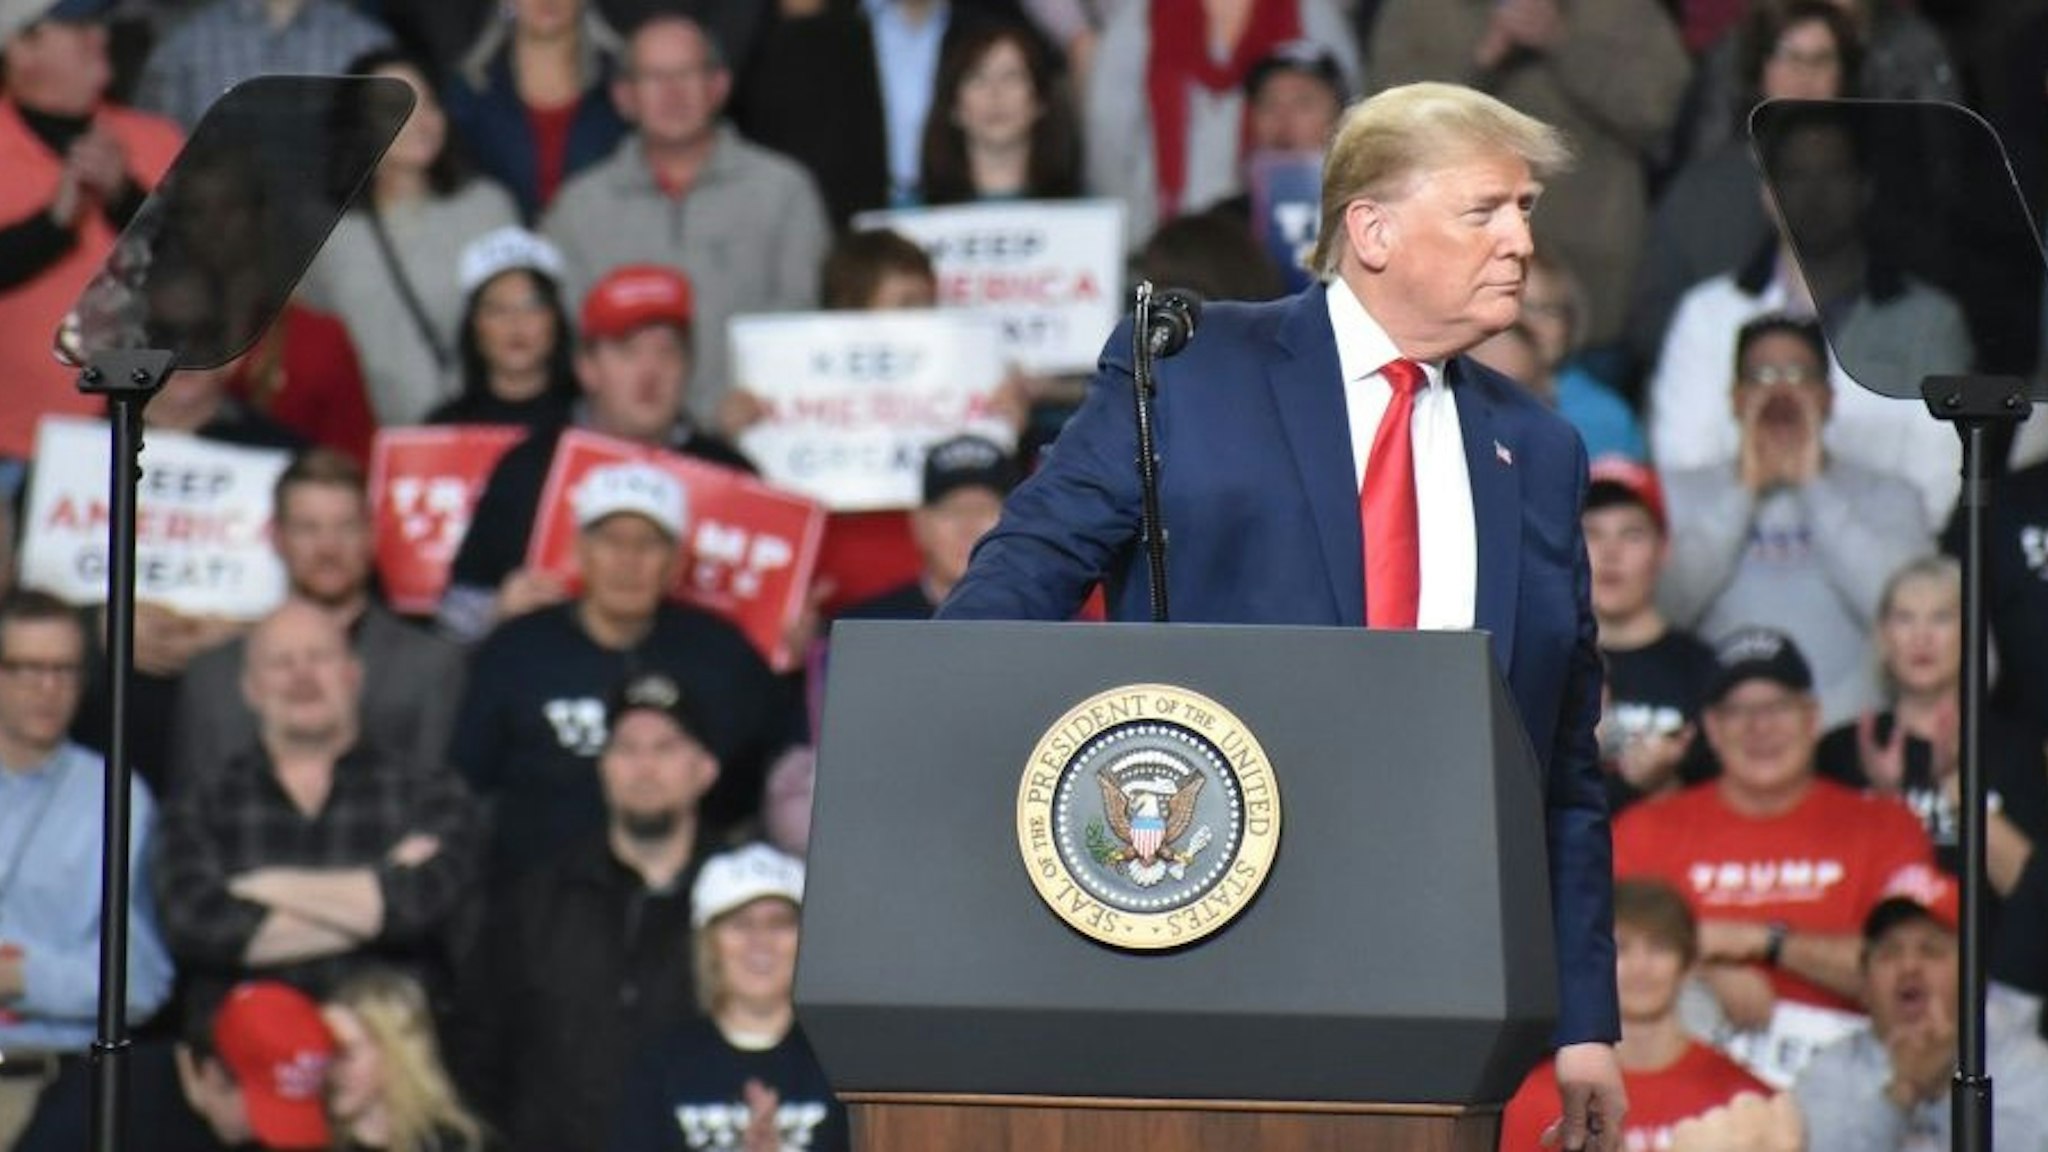 U.S. President Donald Trump speaks during Keep America Great Rally at Huntington Center in Toledo, Ohio, United States on January 09, 2020.